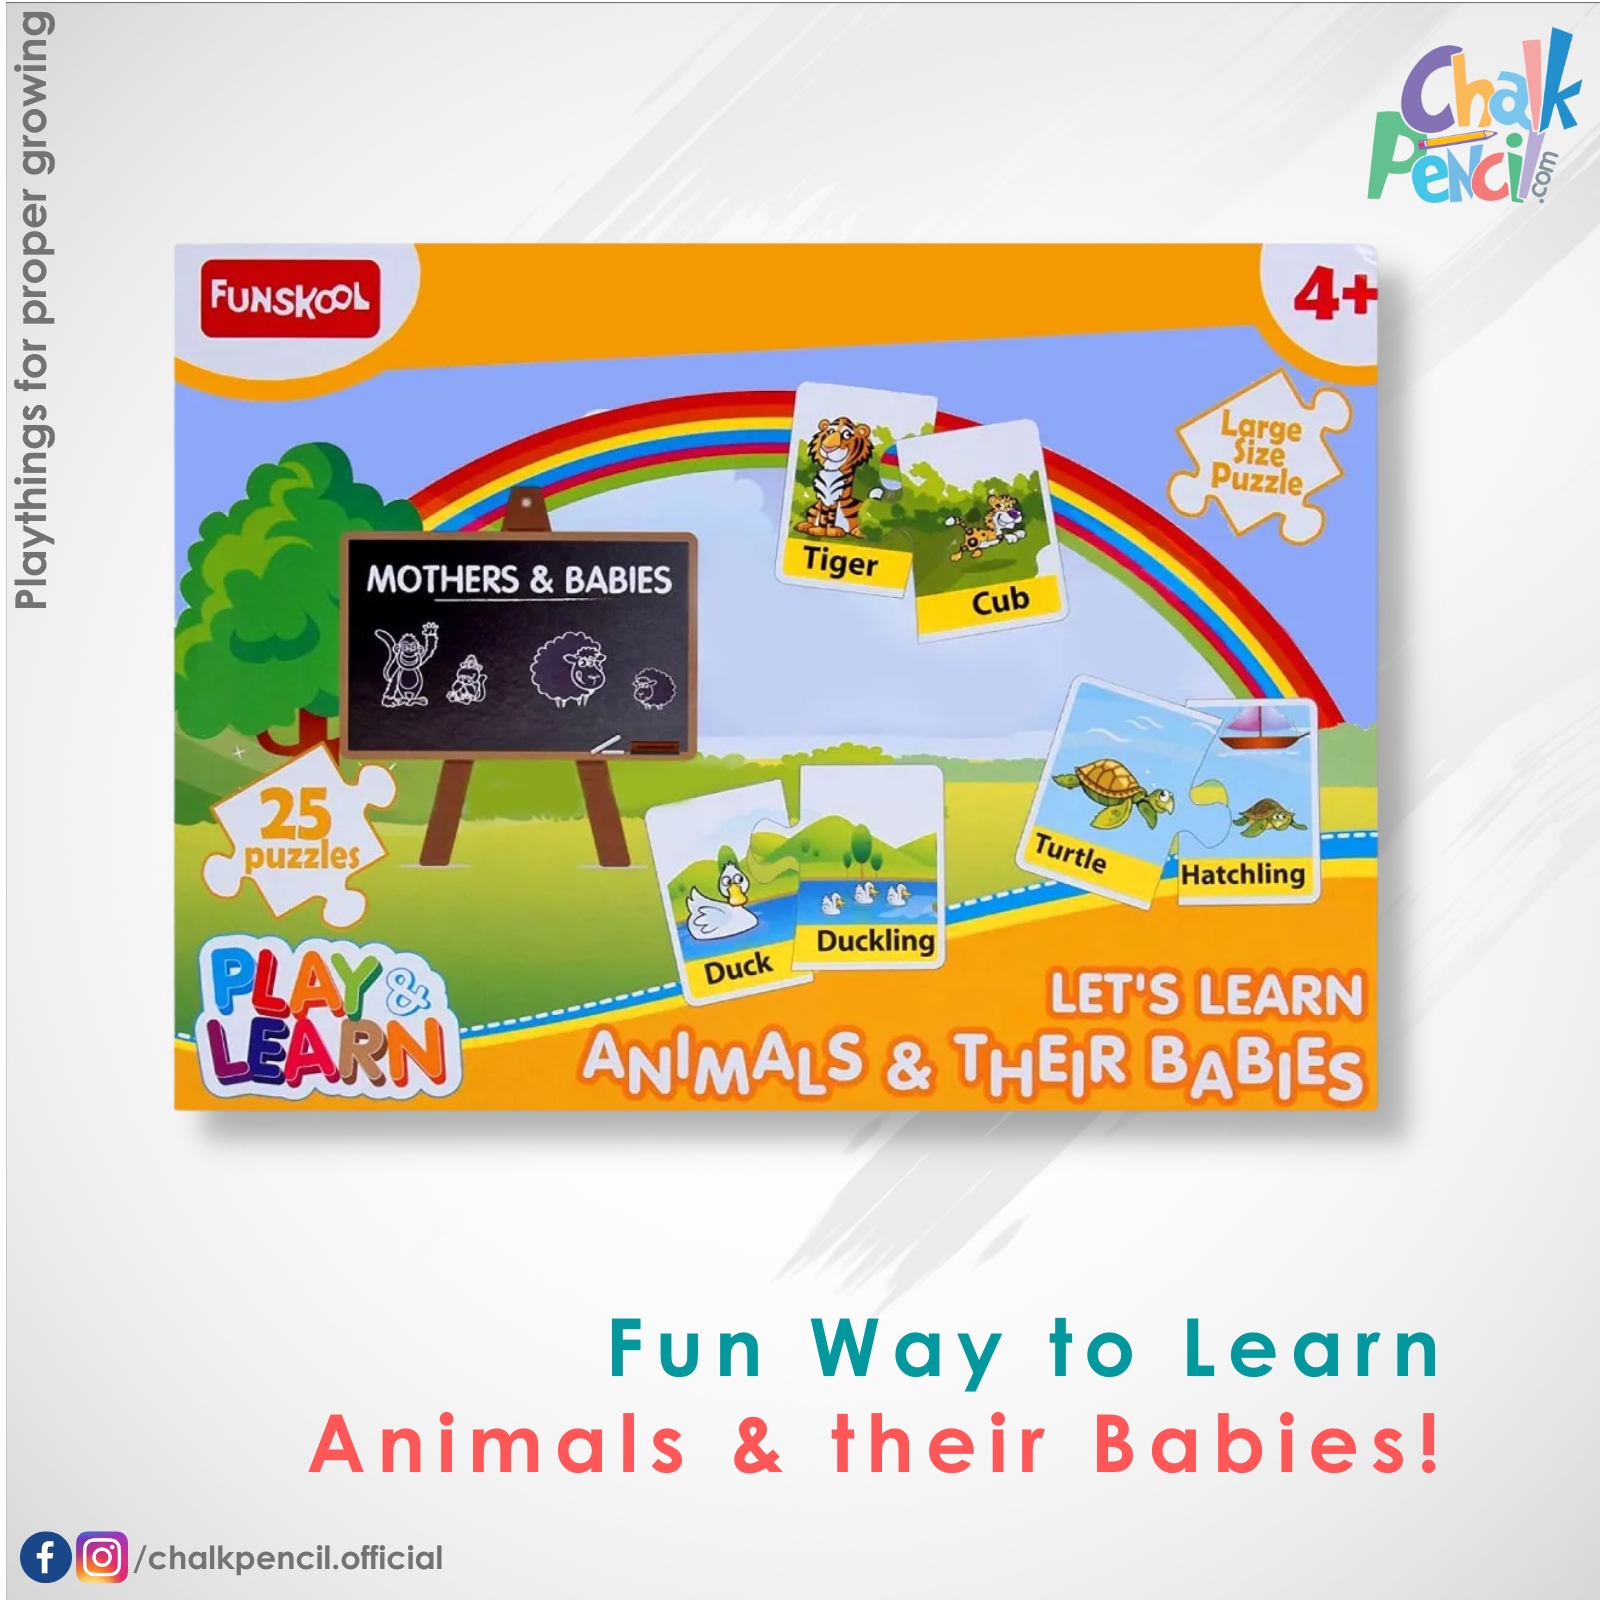 Funskool Let’s Learn Animals & their Babies Puzzle